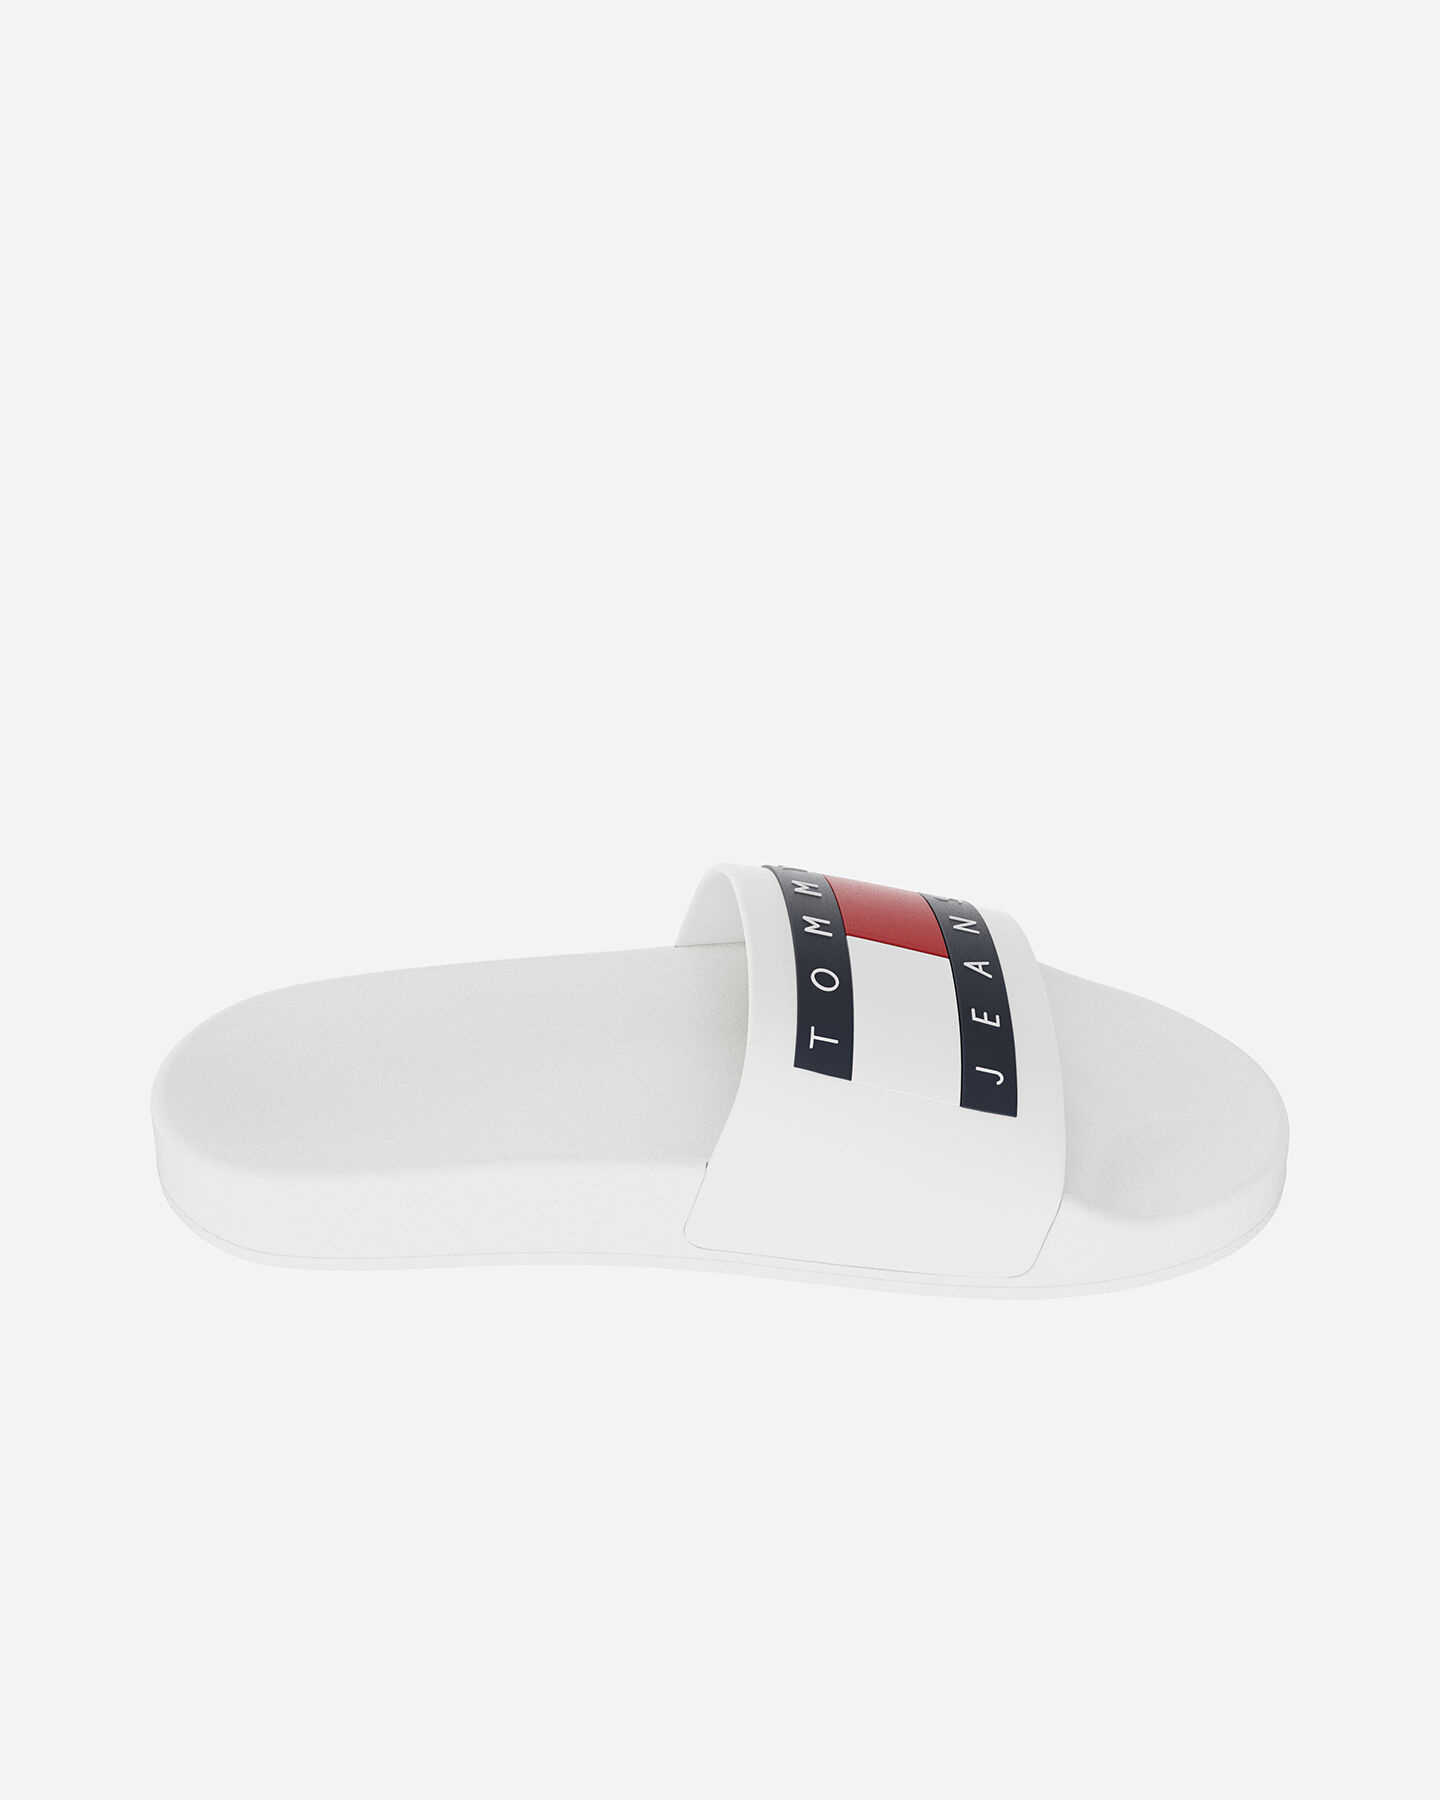  Ciabatte TOMMY HILFIGER FLAG POOL SLD W S4121441|1|38 scatto 3